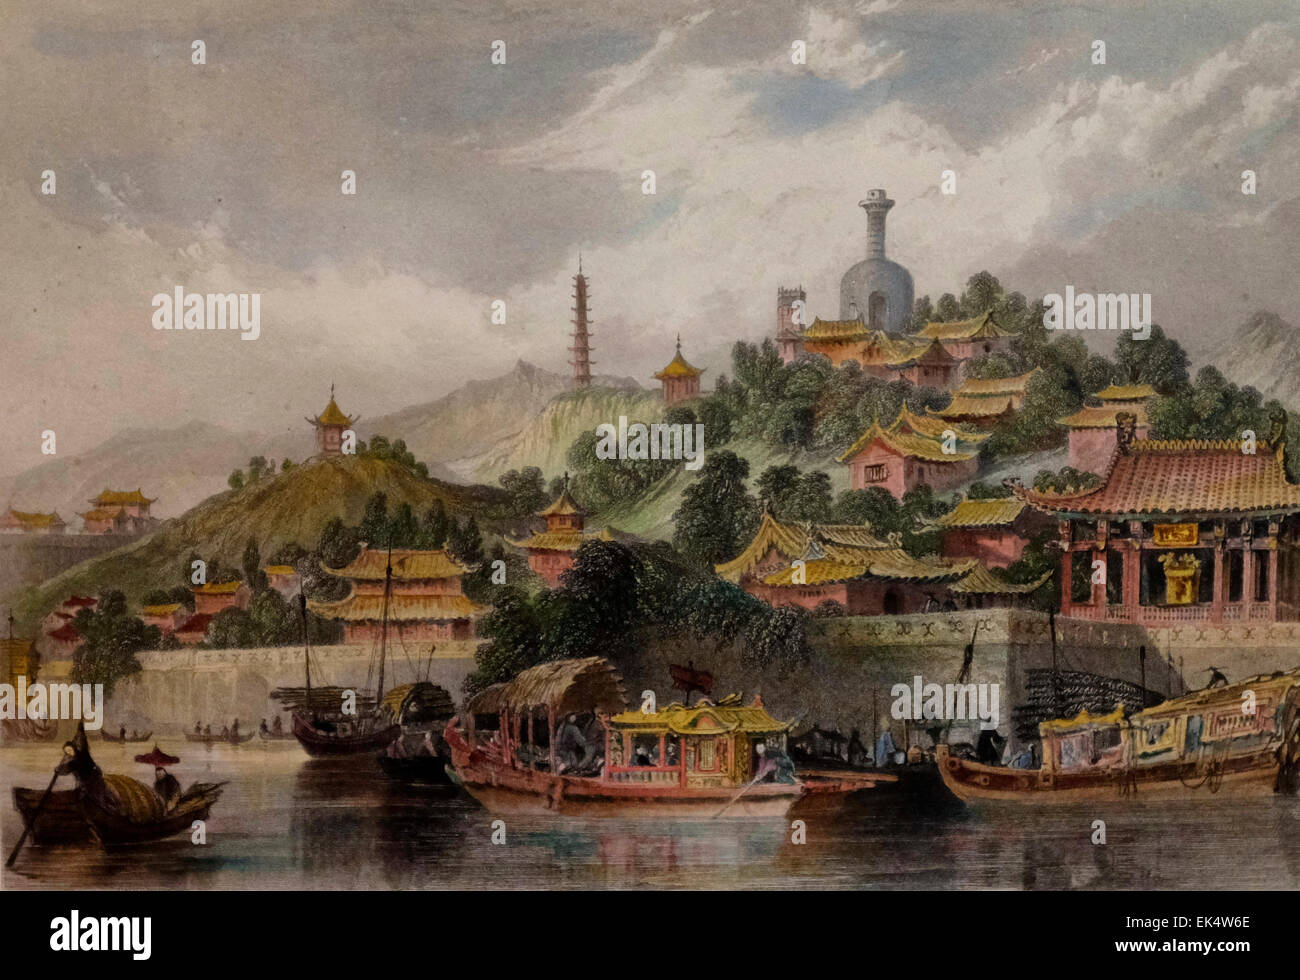 Gardens of the Imperial Palace Peking, China 19th Century Stock Photo